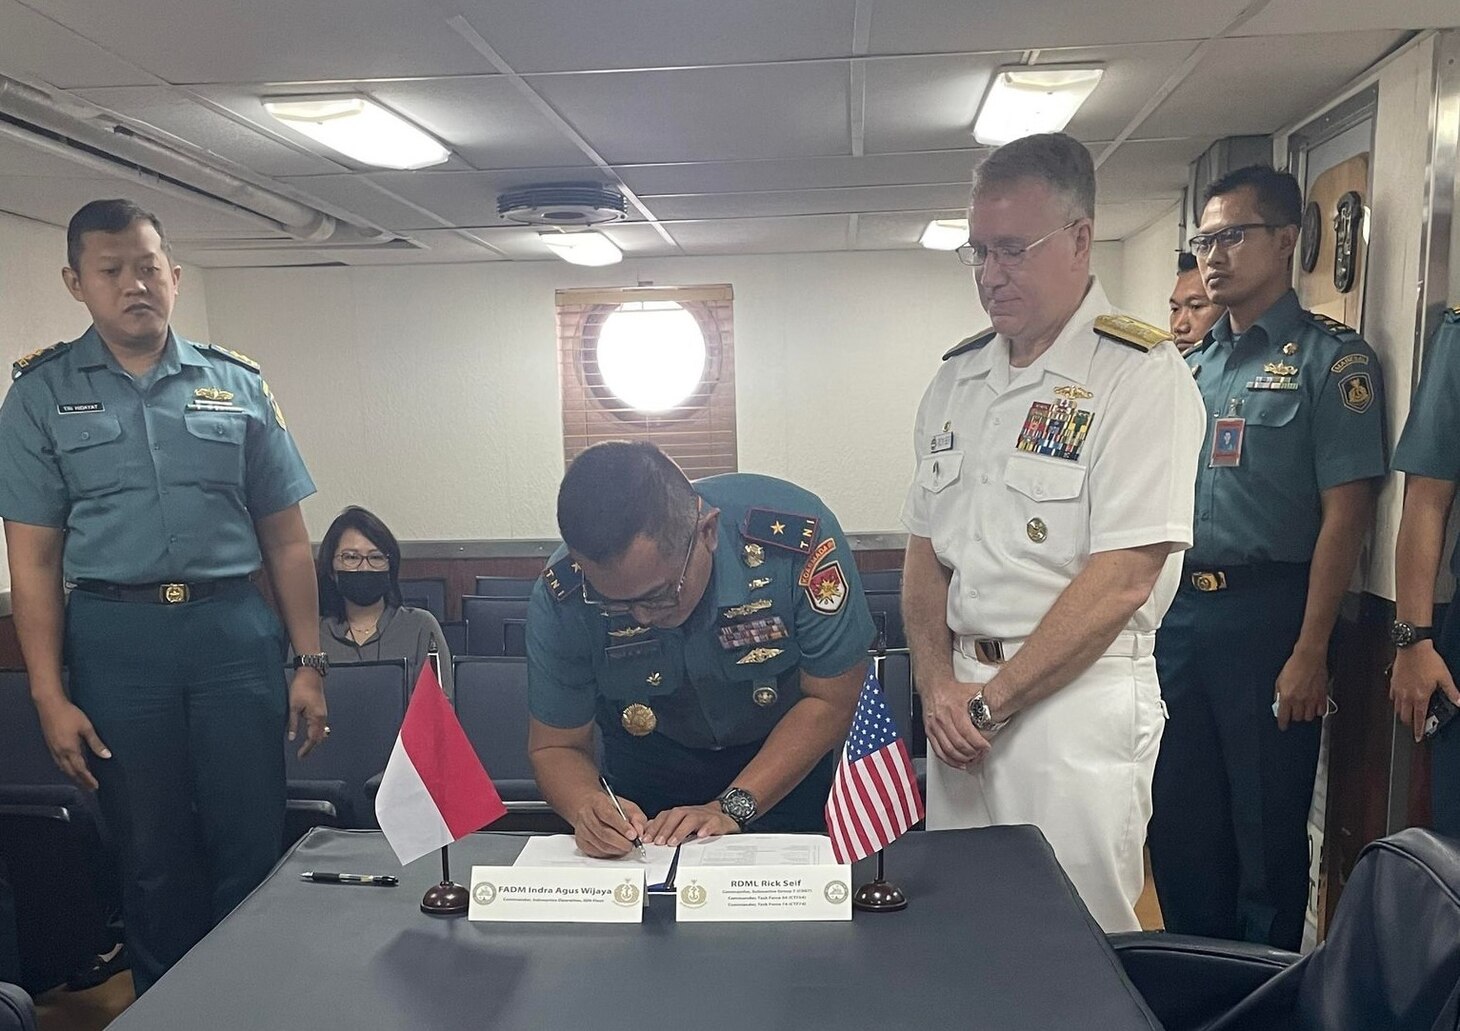 JAKARTA, Indonesia (July 22, 2022) – U.S. Navy Rear Adm. Rick Seif, commander, Submarine Group 7/Task Force 74 signs the 6th Indonesian National Military-Naval Force and U.S. Navy Submarine Force Staff Talks action items aboard the Emory S. Land-class submarine tender USS Frank Cable (AS 40) in Jakarta, Indonesia, July 22, 2022. Submarine Group 7 directs forward-deployed, combat capable forces across the full spectrum of undersea warfare throughout the Western Pacific, Indian Ocean, and Arabian Sea. (Photo courtesy of Lt. Haley Bonner)